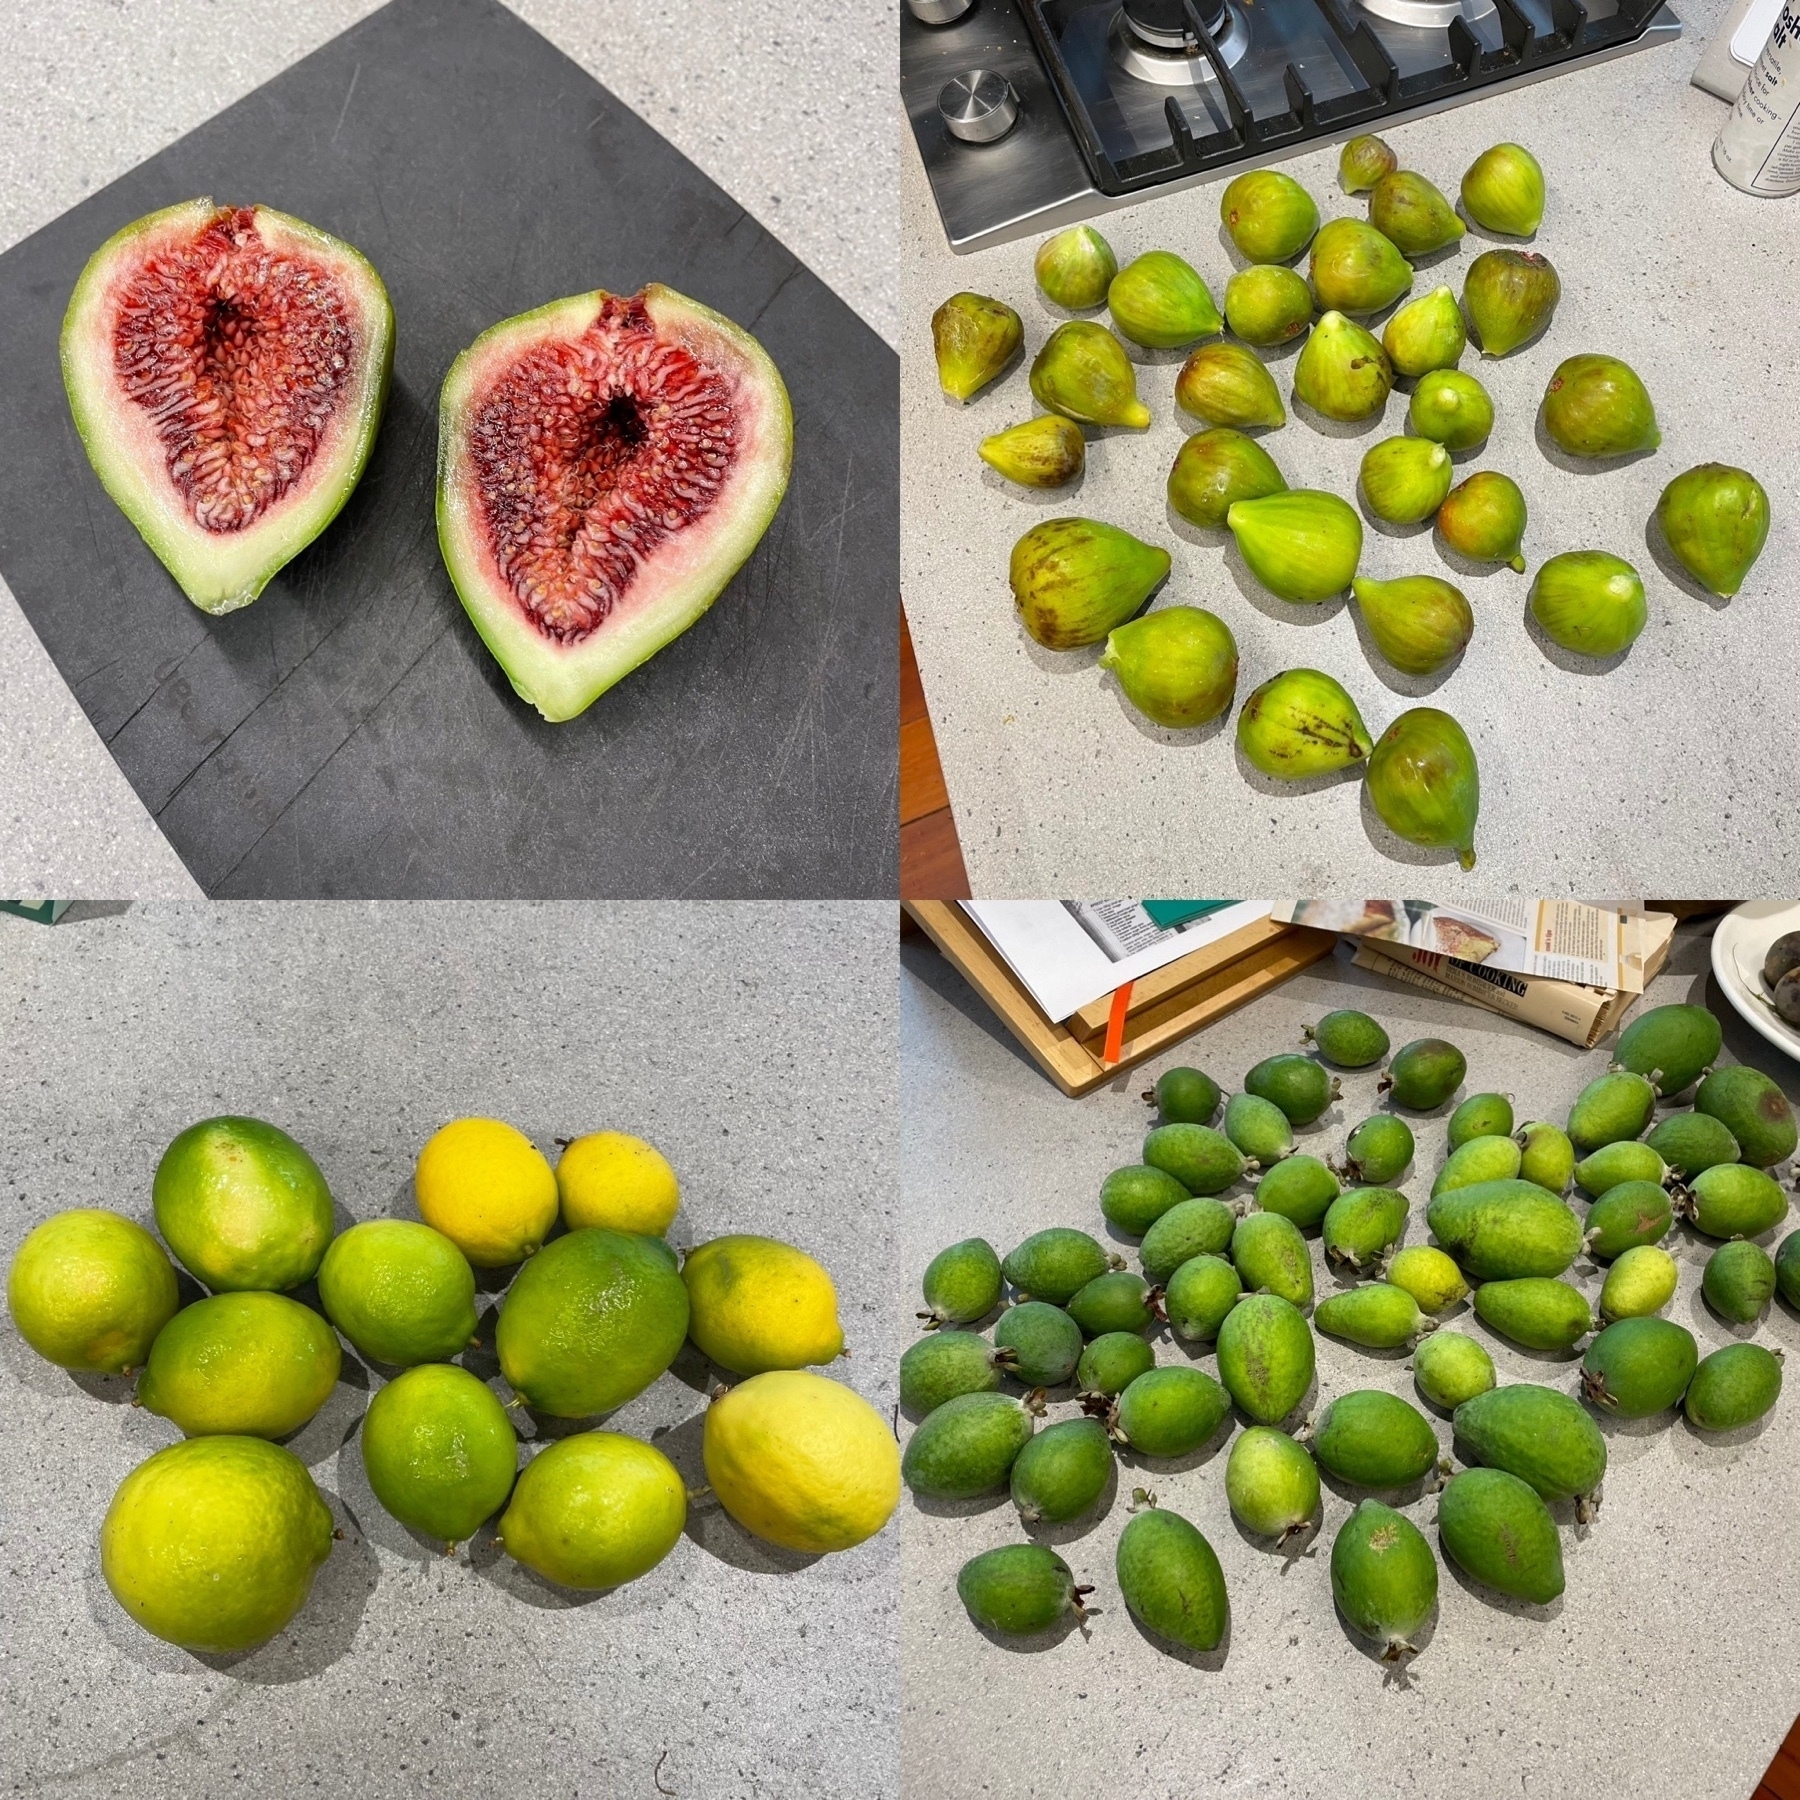 Cut red figs, a collection of figs, feijoas and limes